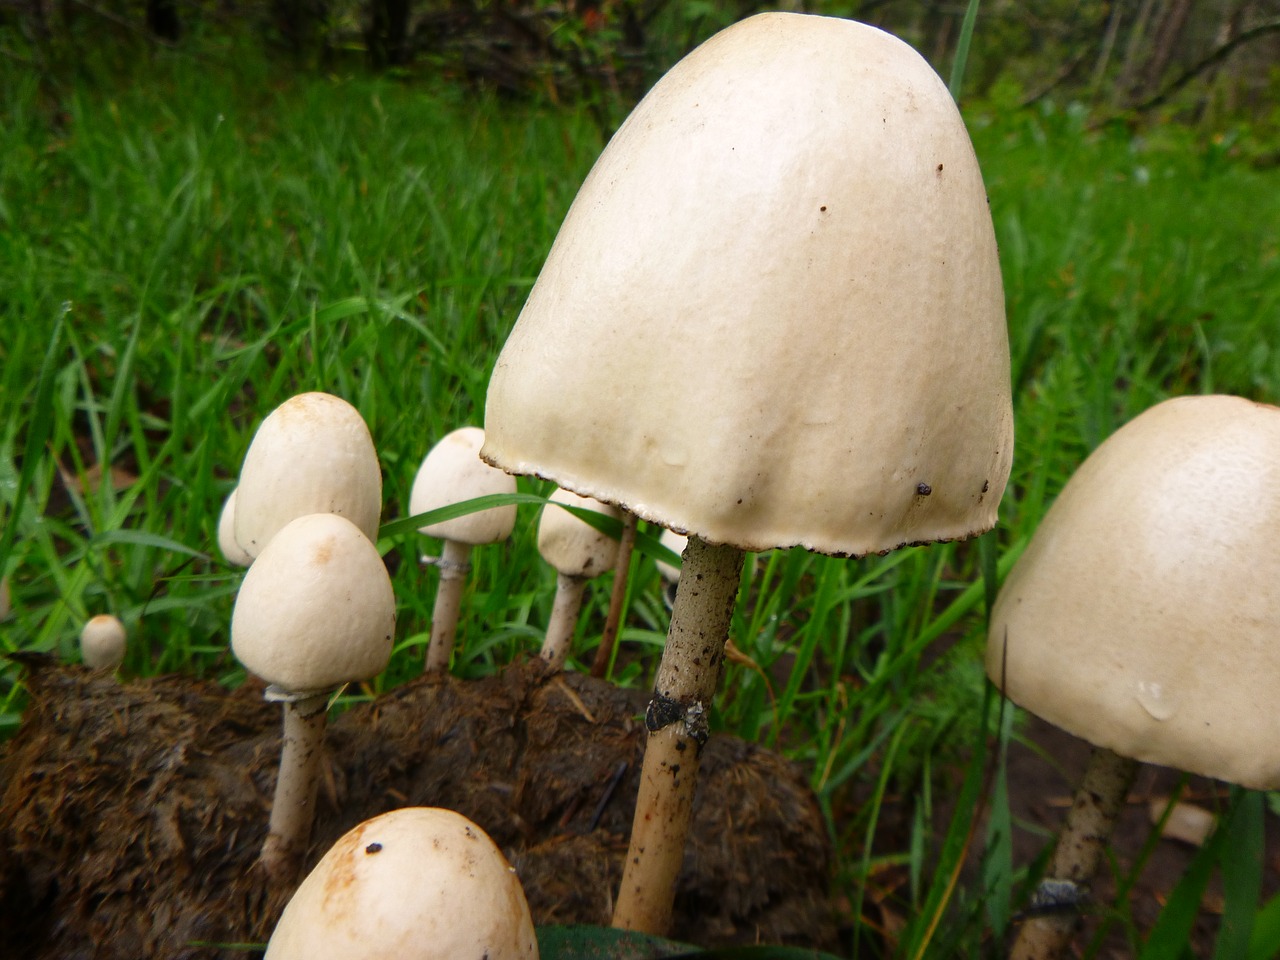 Image - camping mushroom forest nature